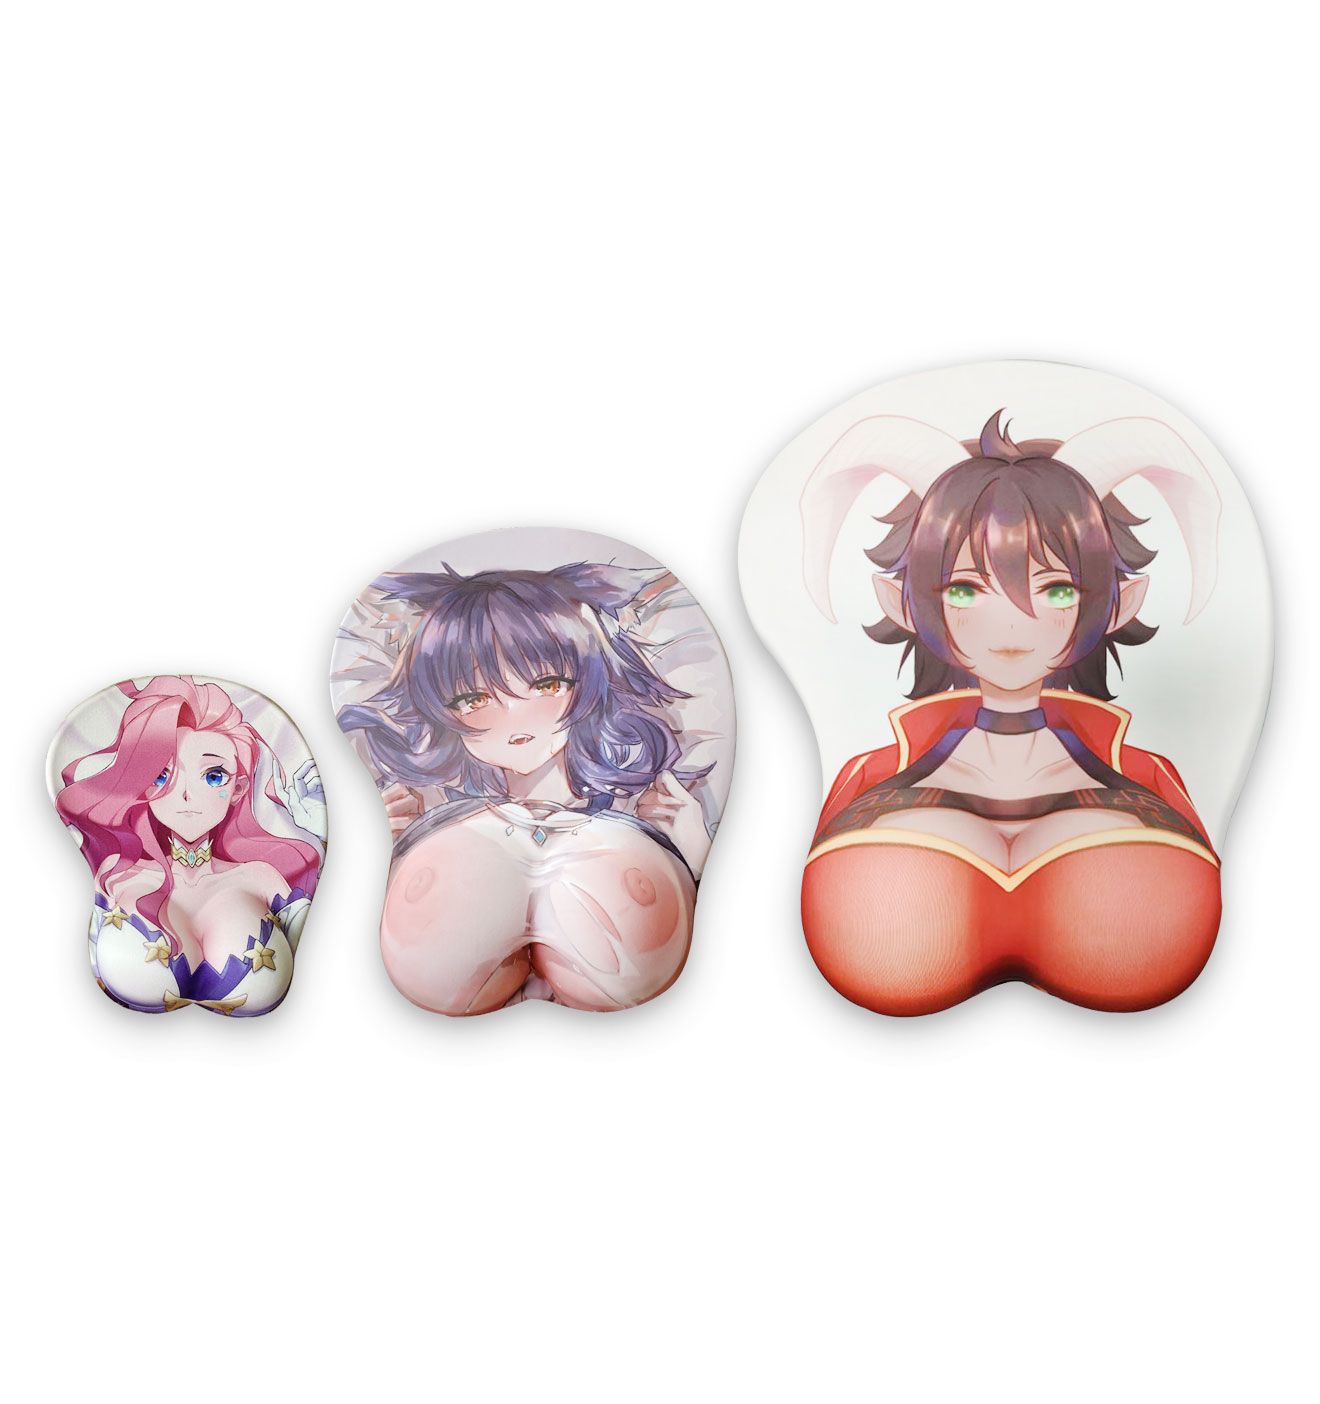 fischl life size oppai mousepad 6364 - Anime Mousepads